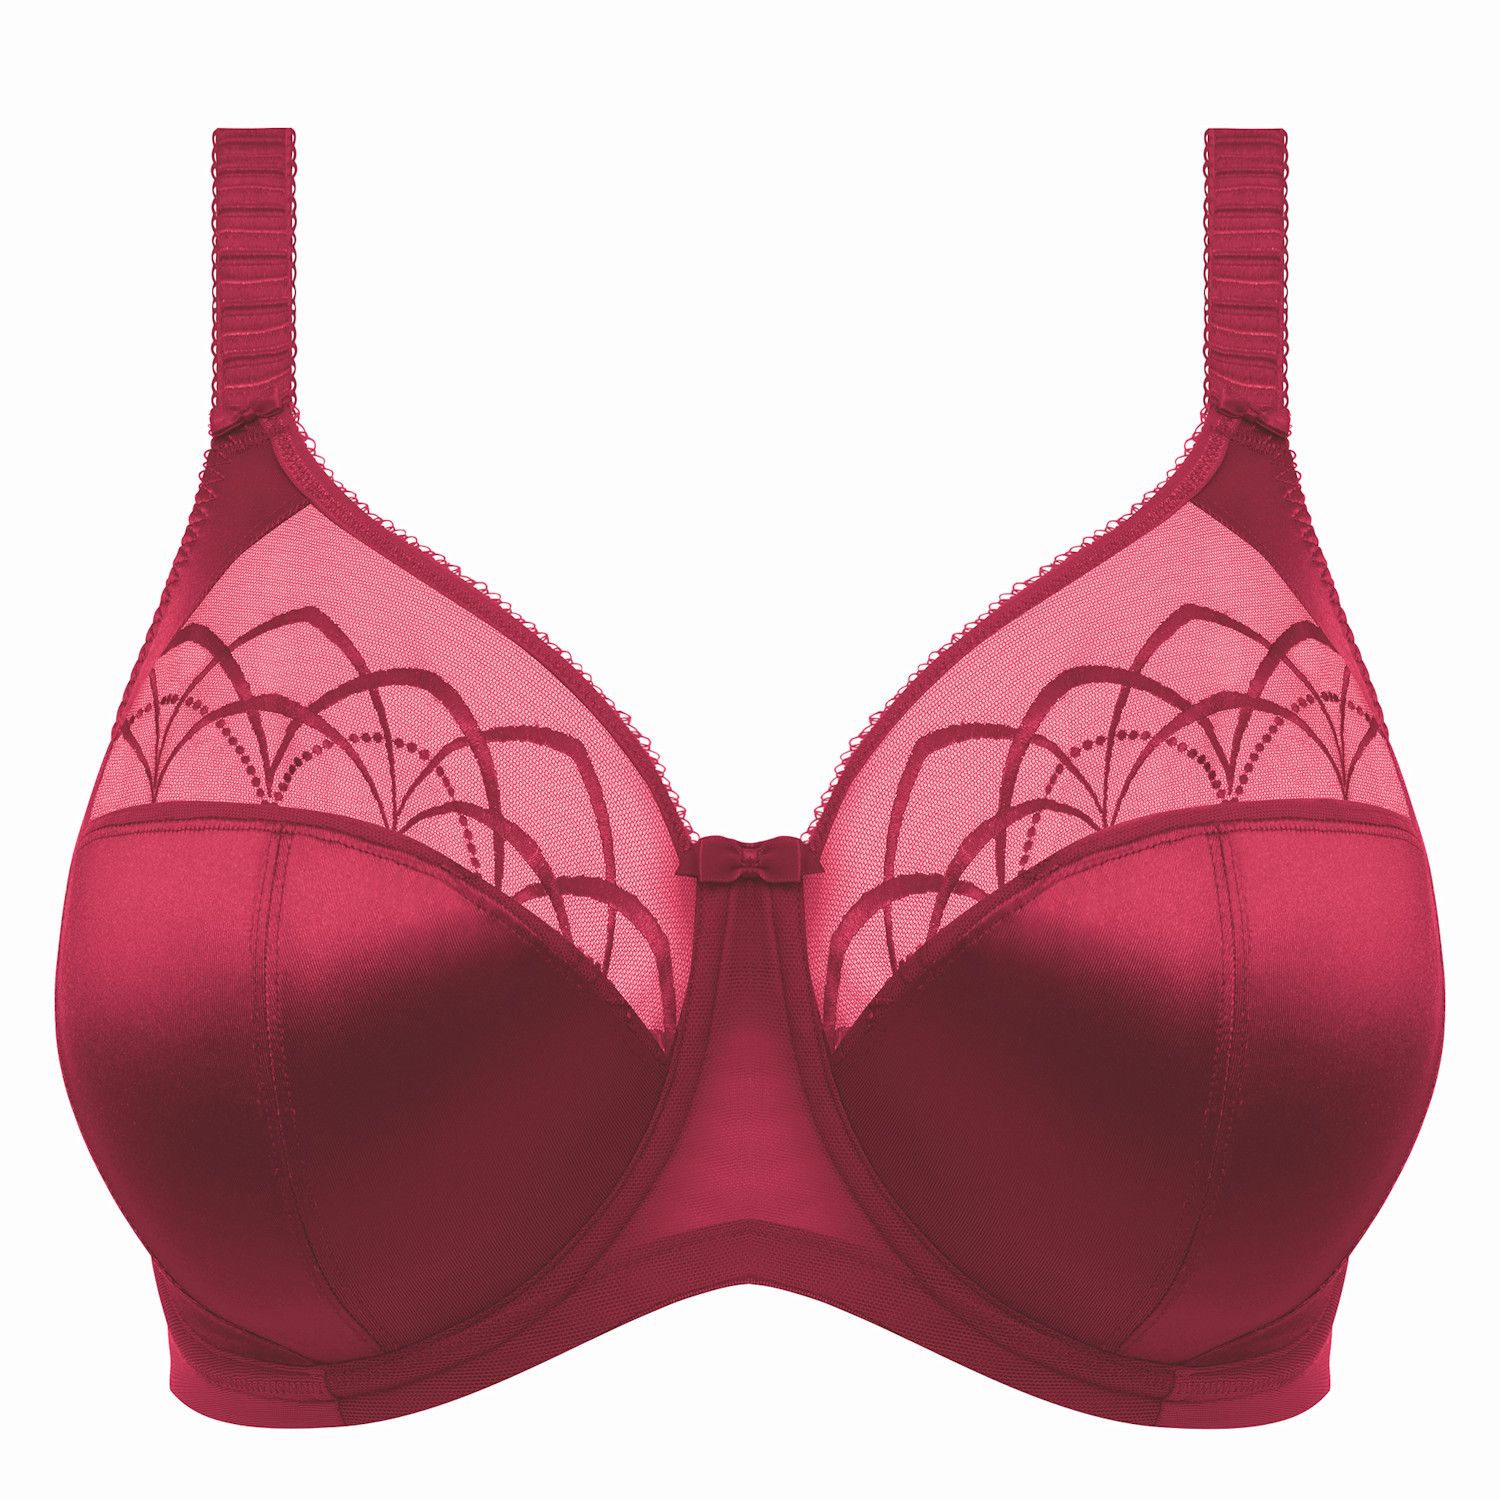 Elomi Cate Underwire Full Cup Banded Bra EL4030 